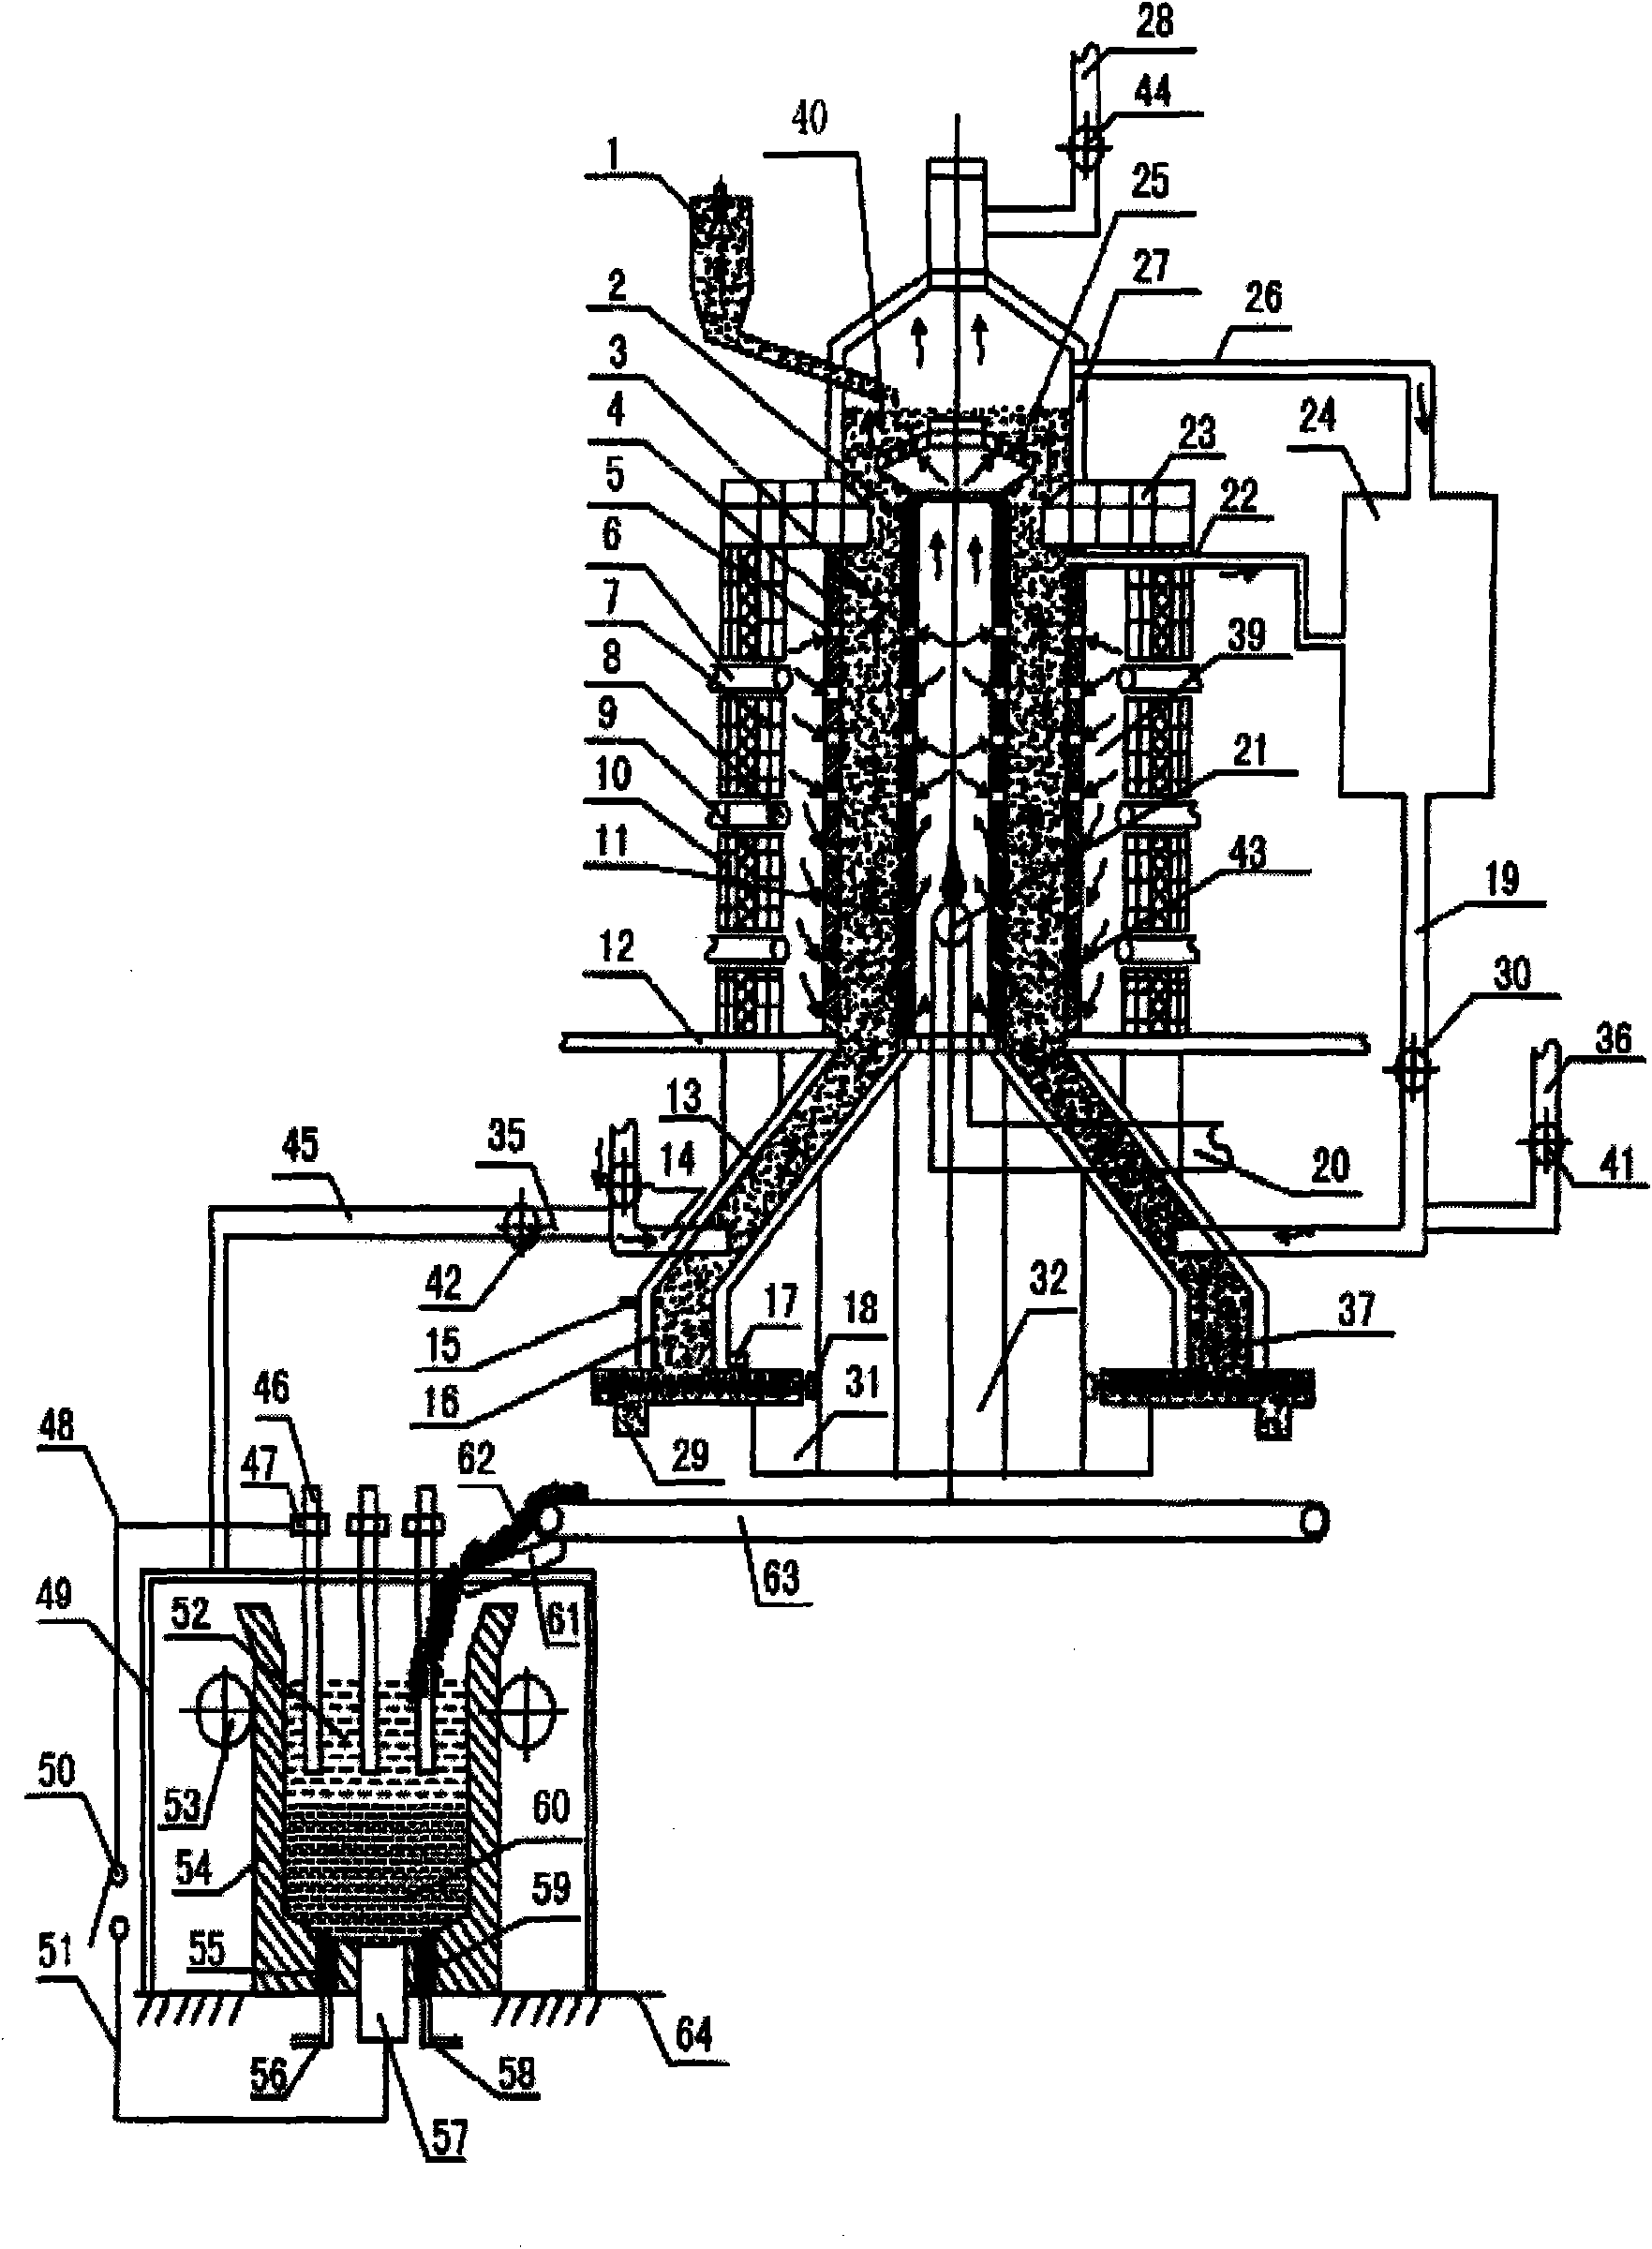 Process and device for smelting ferronickel and nickel-containing molten iron by using lower-nickel materials